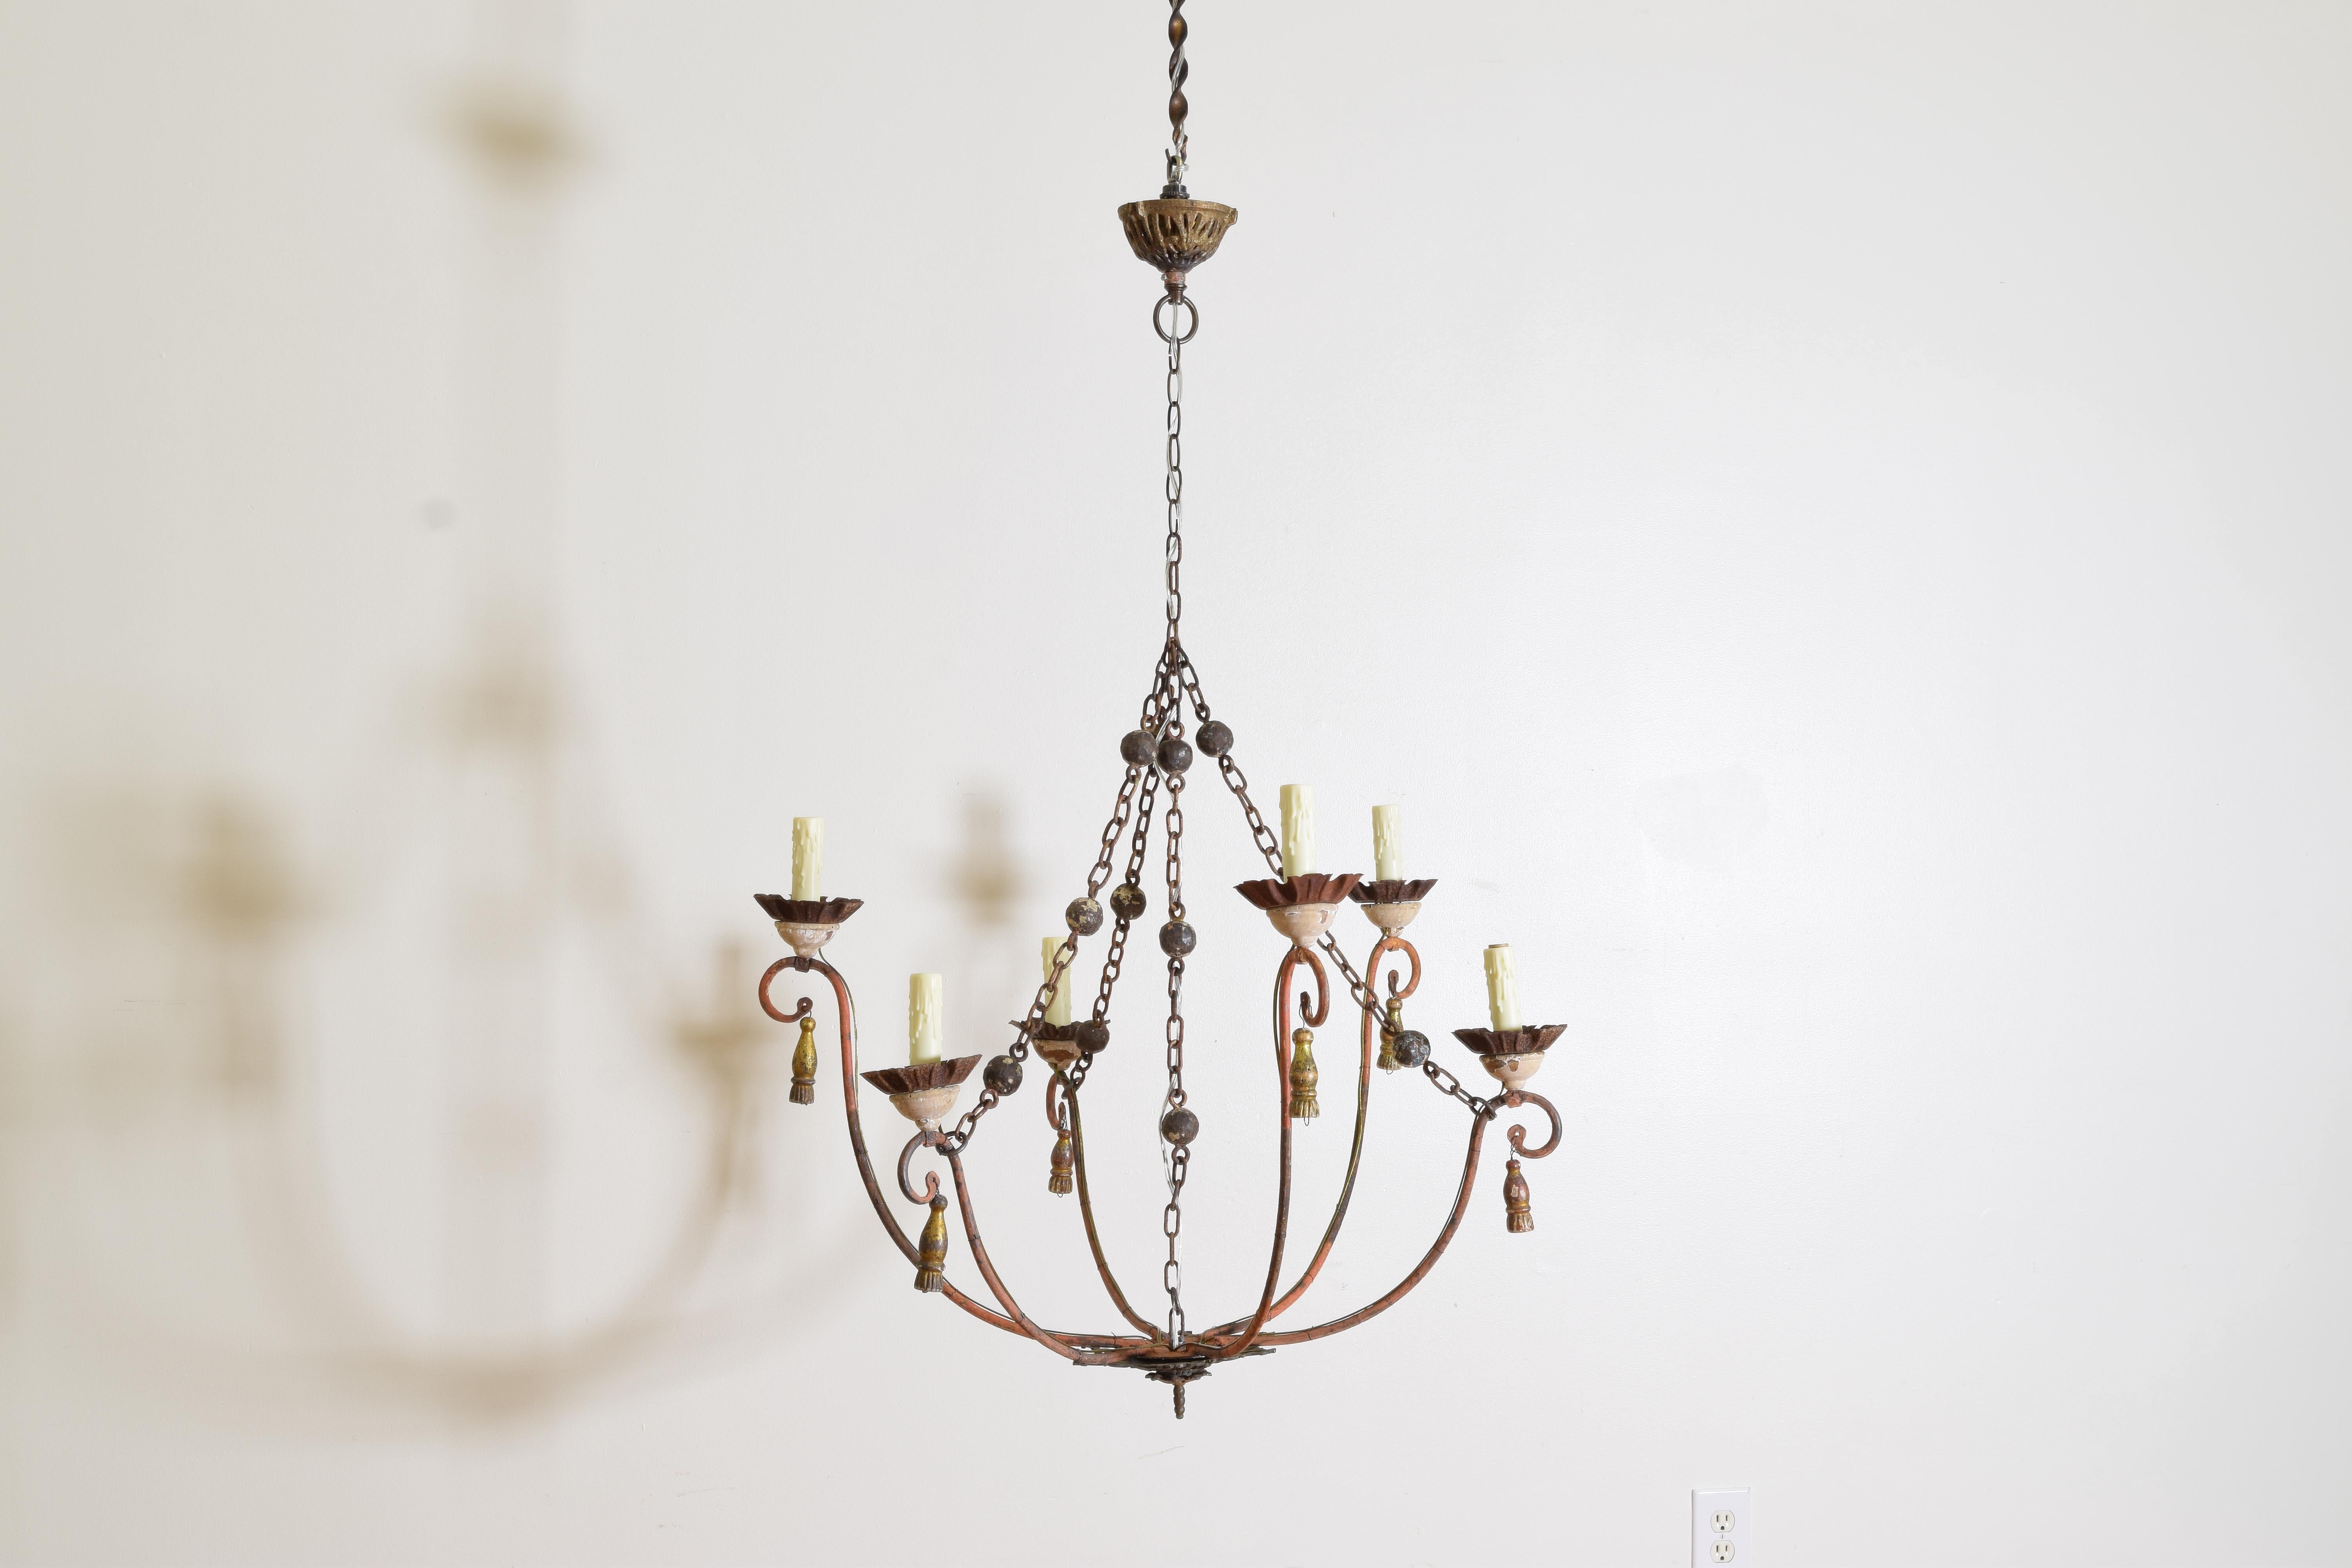 A large red-painted iron chandelier made up of 19th century and later parts with decorative chains and hanging tassels from the carved wooden and iron bobeches.